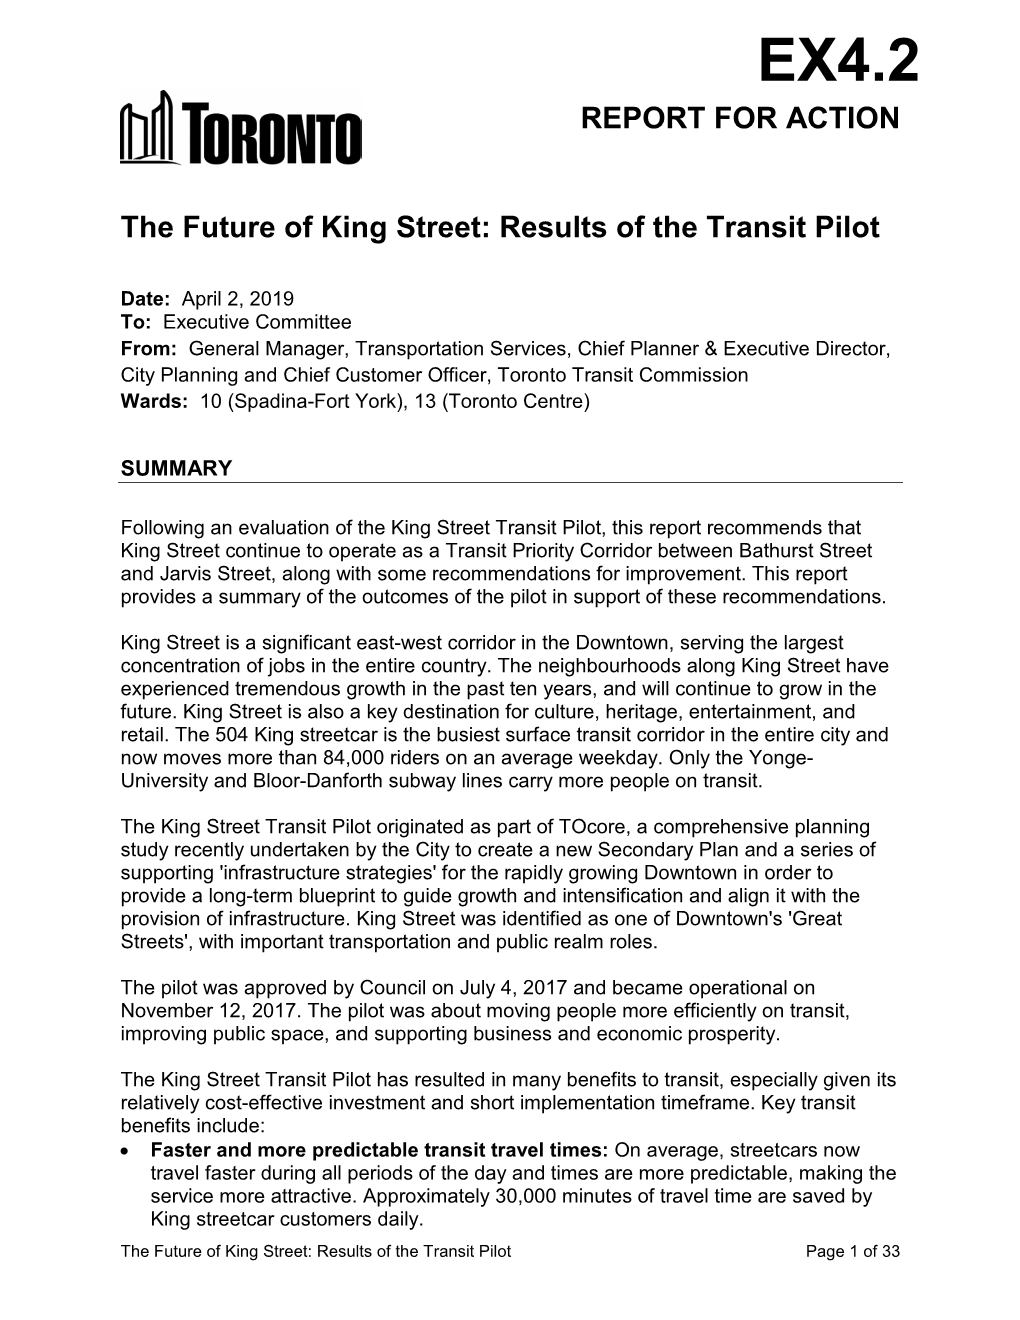 The Future of King Street: Results of the Transit Pilot